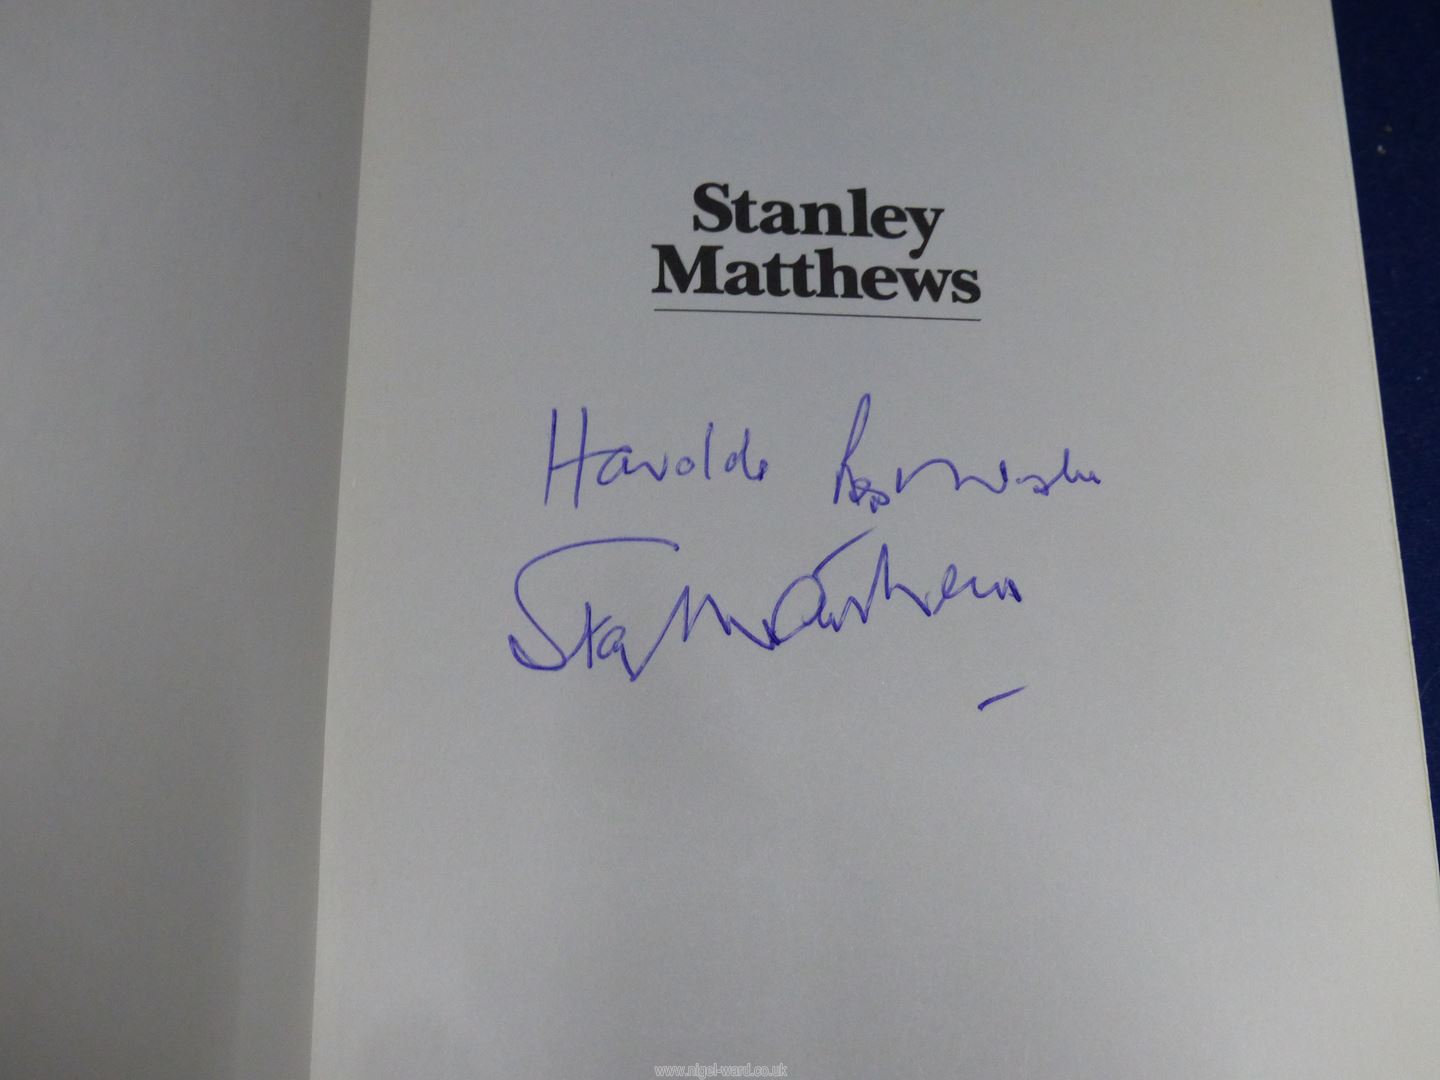 A Stanley Mathews The Authorized Biography by David Milles, published 1989, - Image 2 of 2